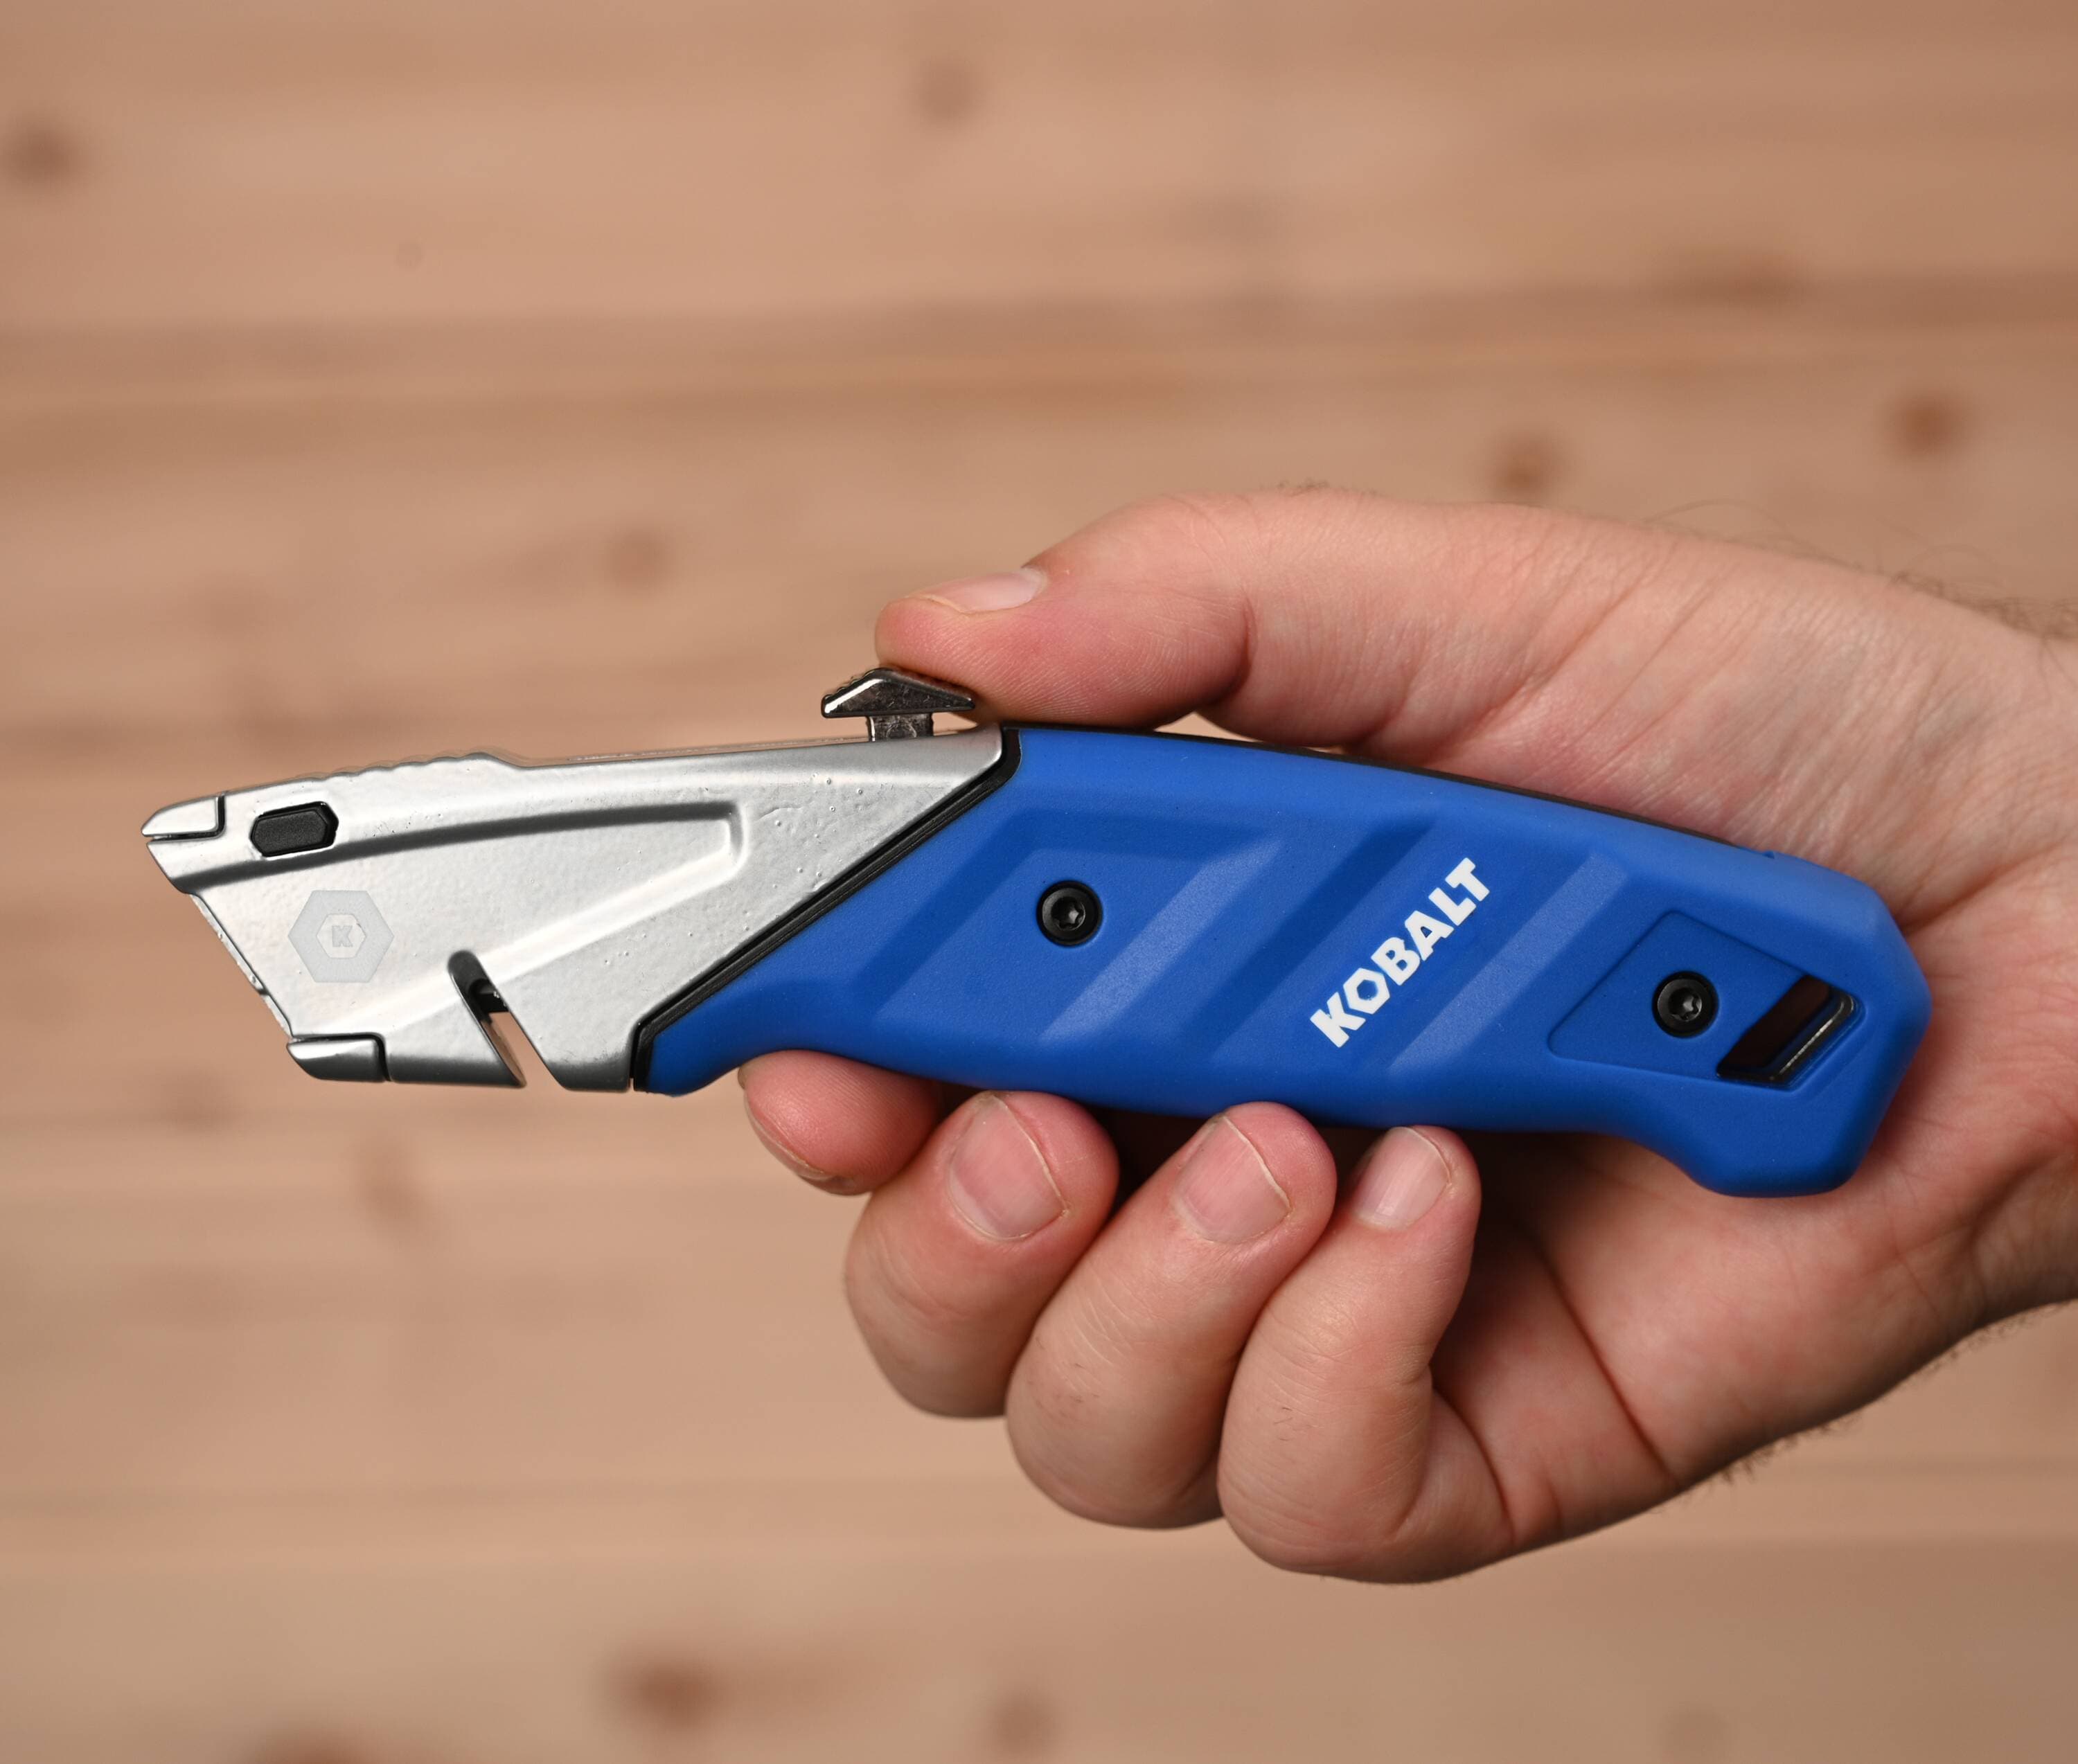 Kobalt Heavy Duty Fixed 3/4-in 3-Blade Utility Knife with On Tool Blade  Storage in the Utility Knives department at